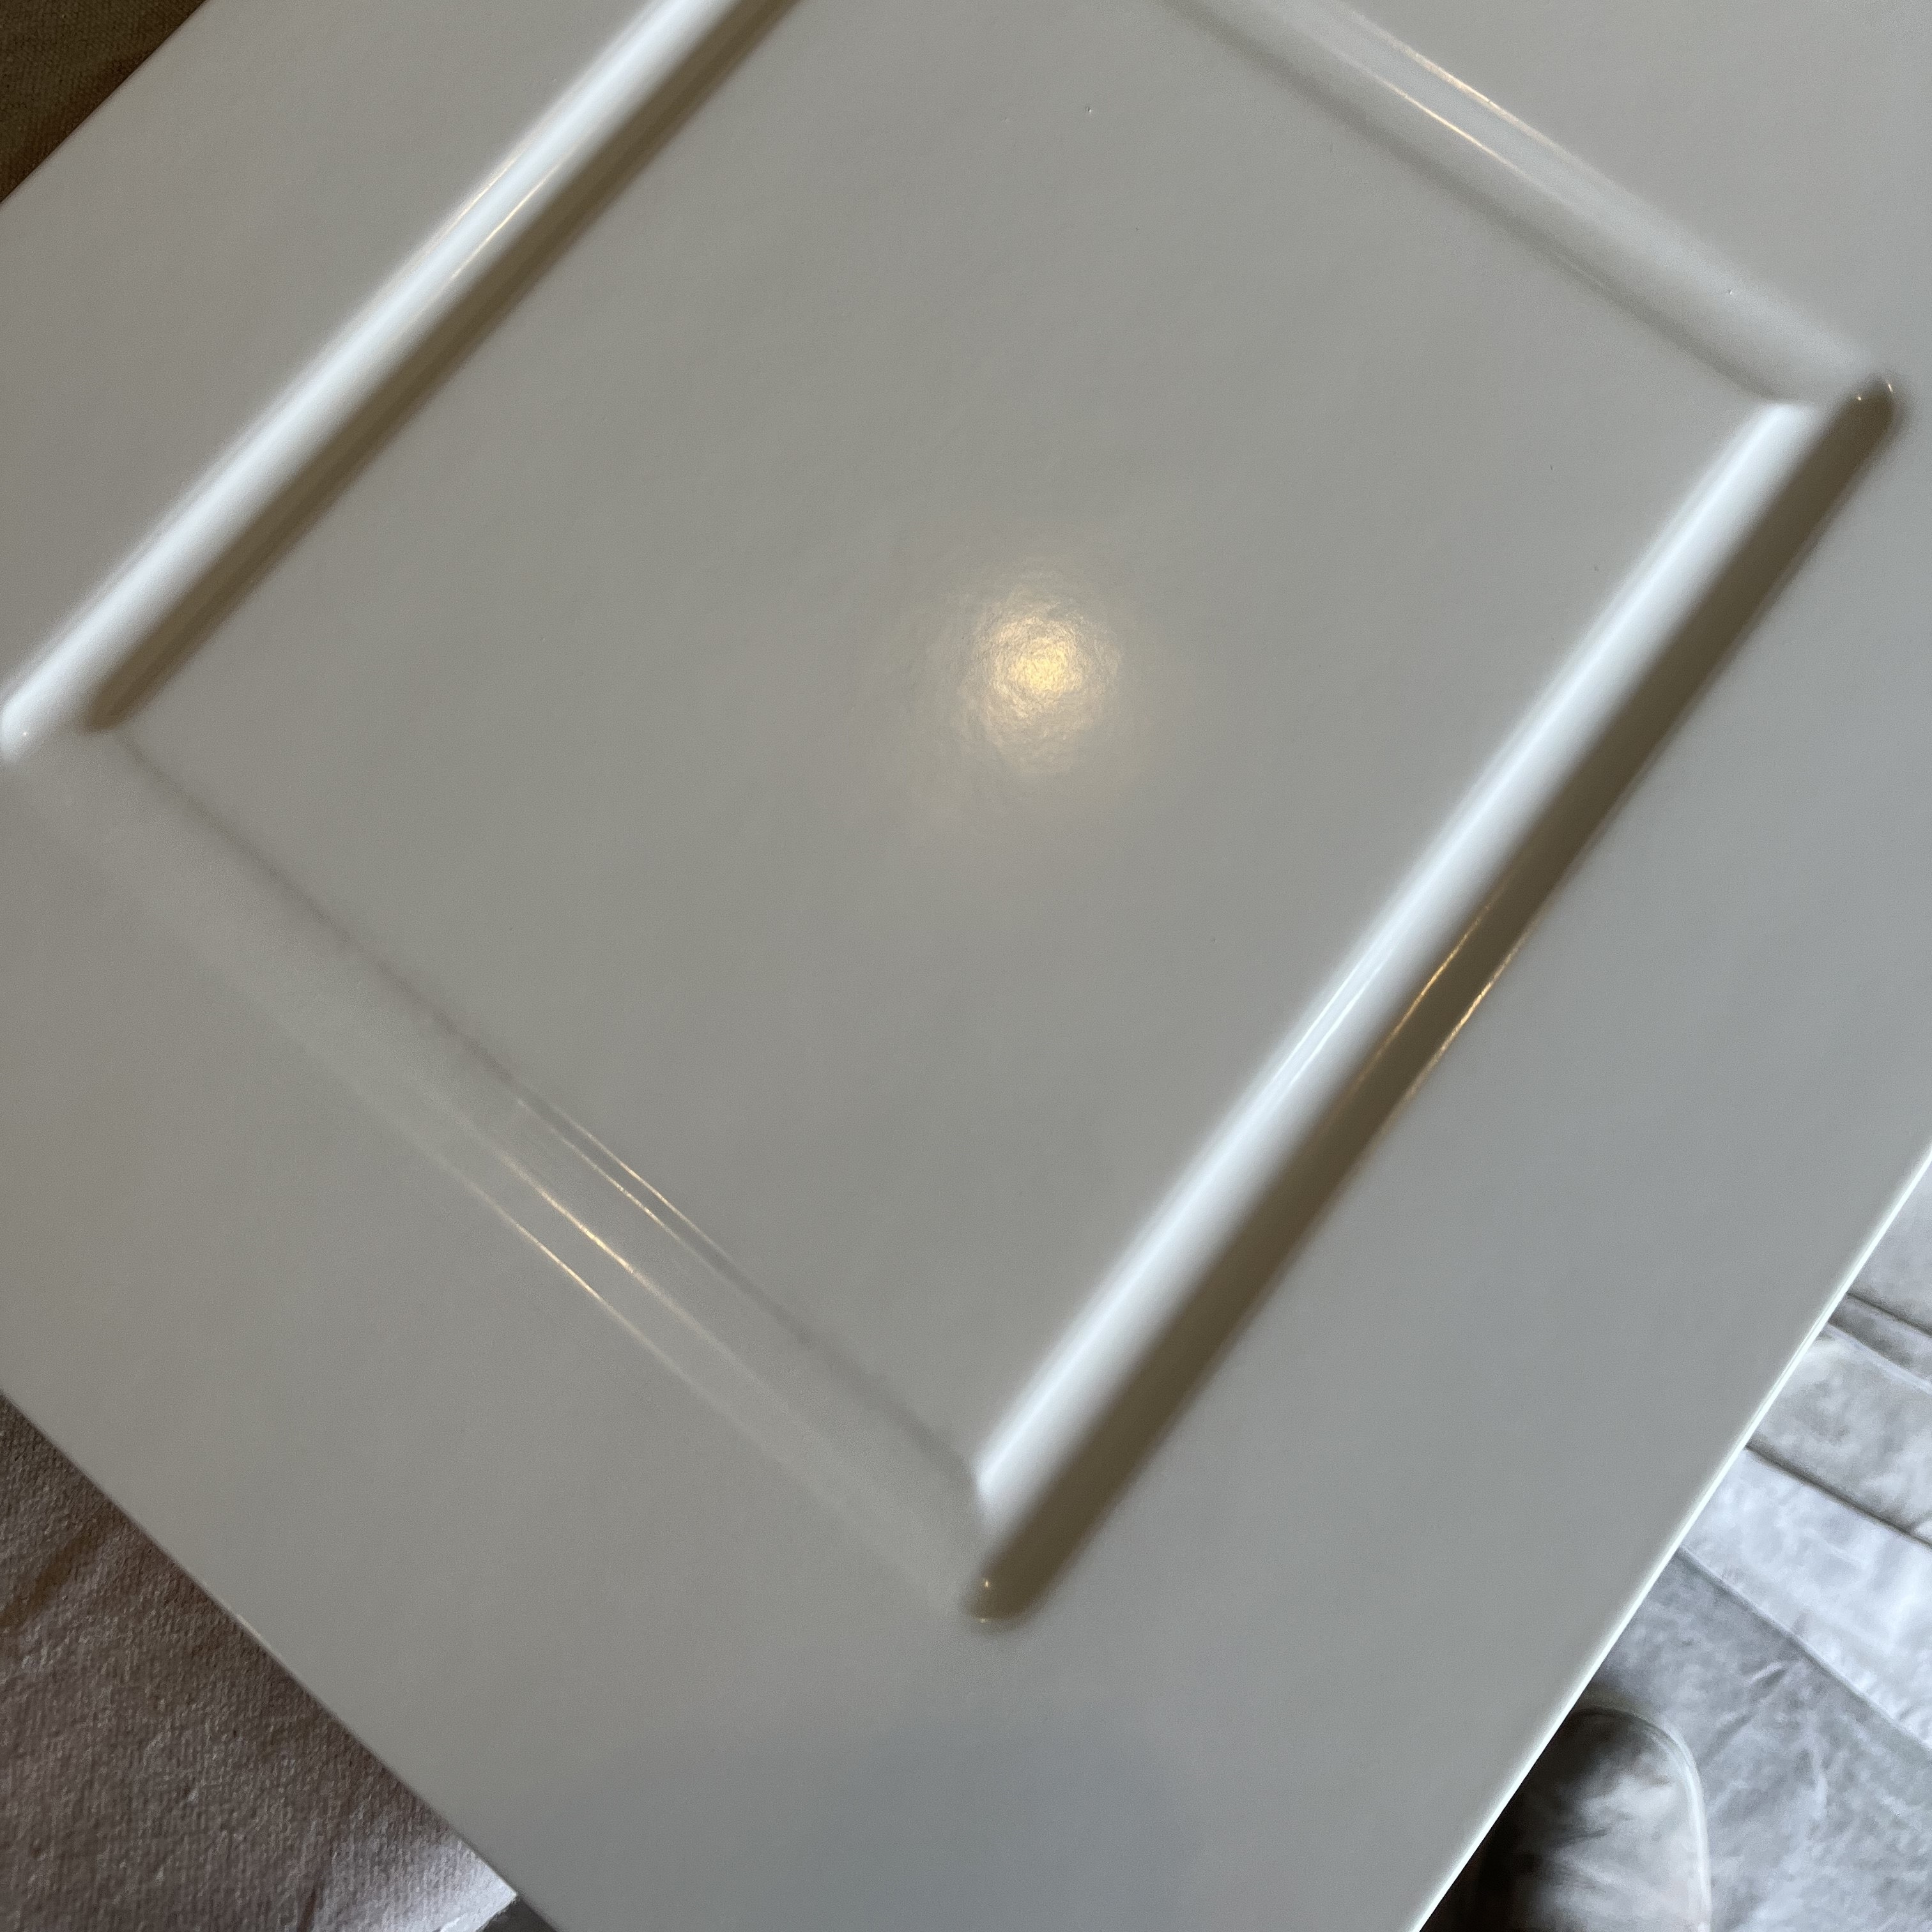 Calgary kitchen cabinet painting